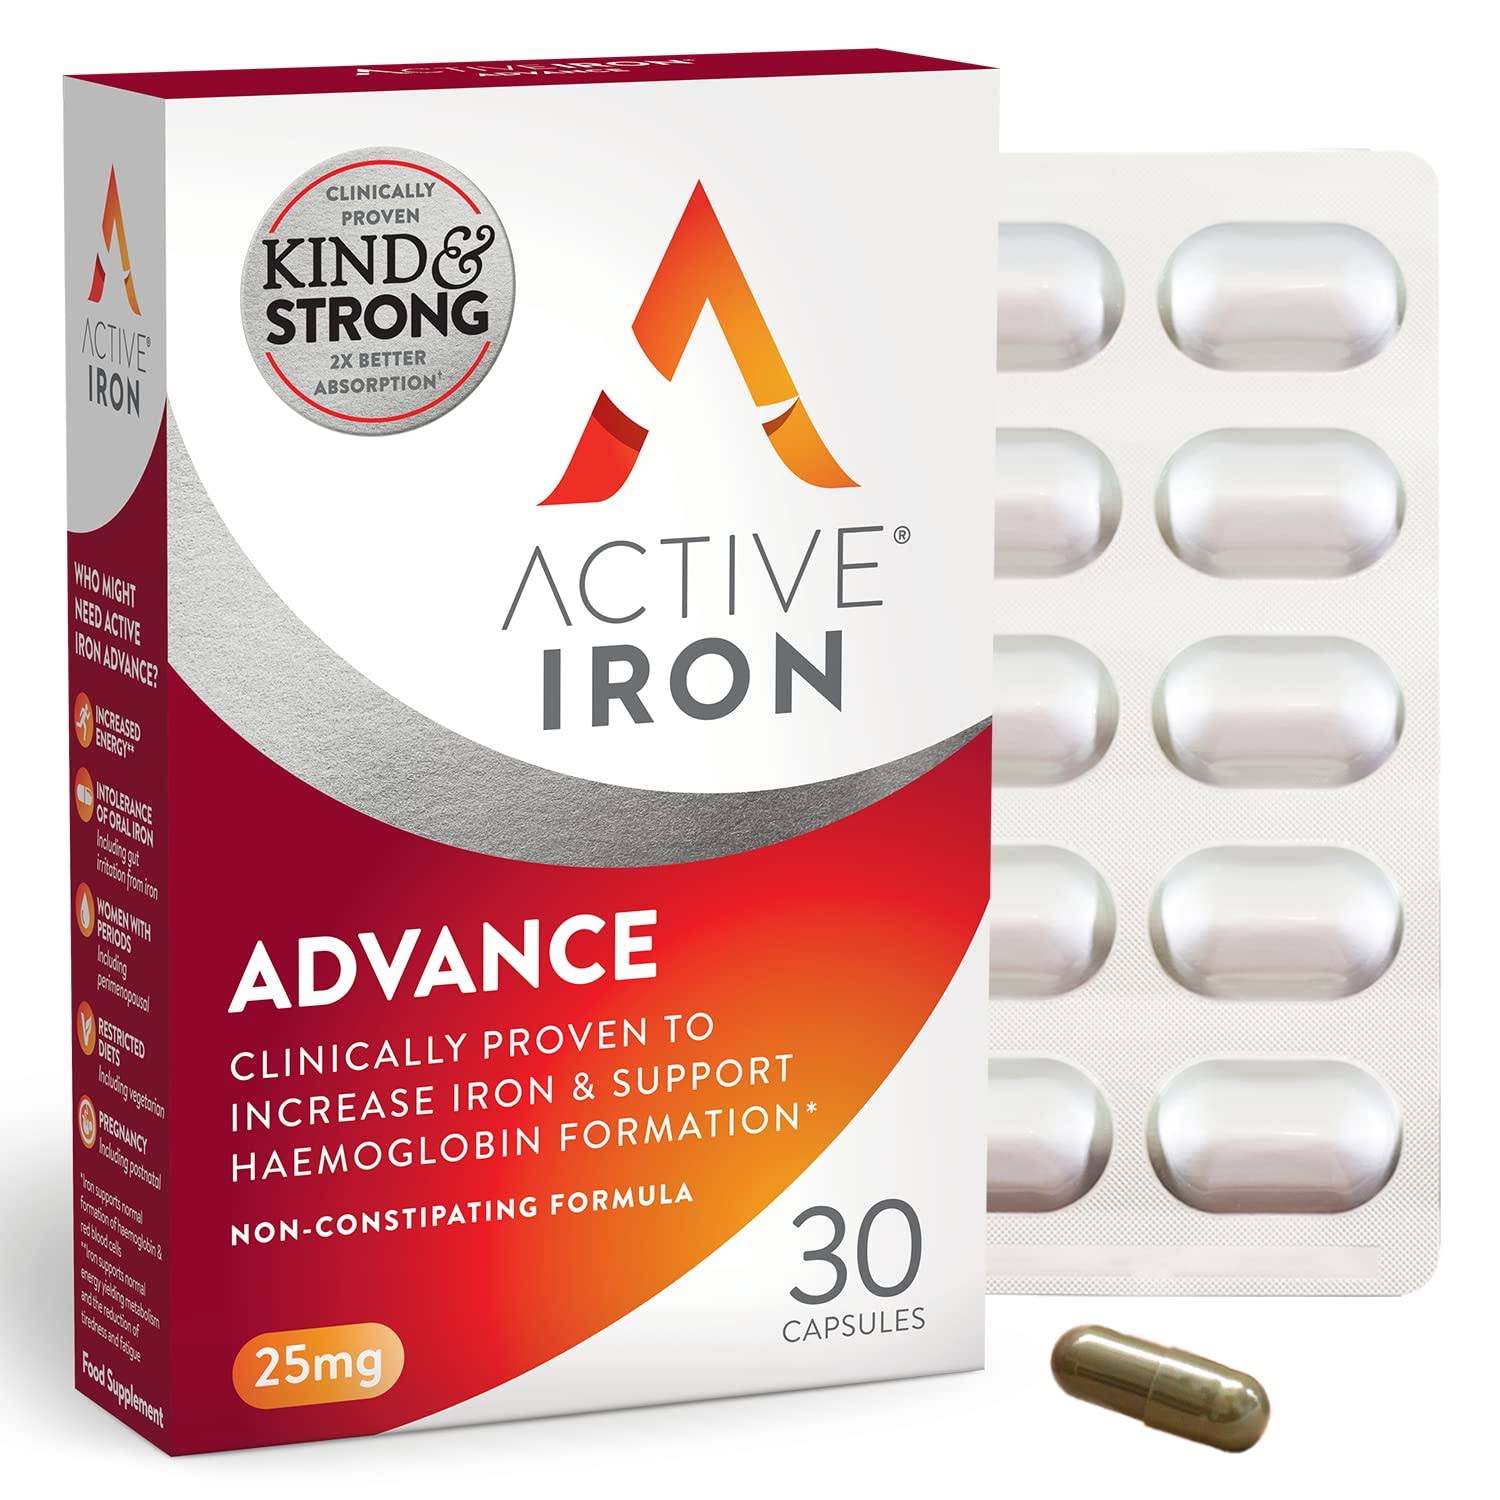 Active Iron Advance 25mg Iron Supplement Non- Constipating Clinically Proven